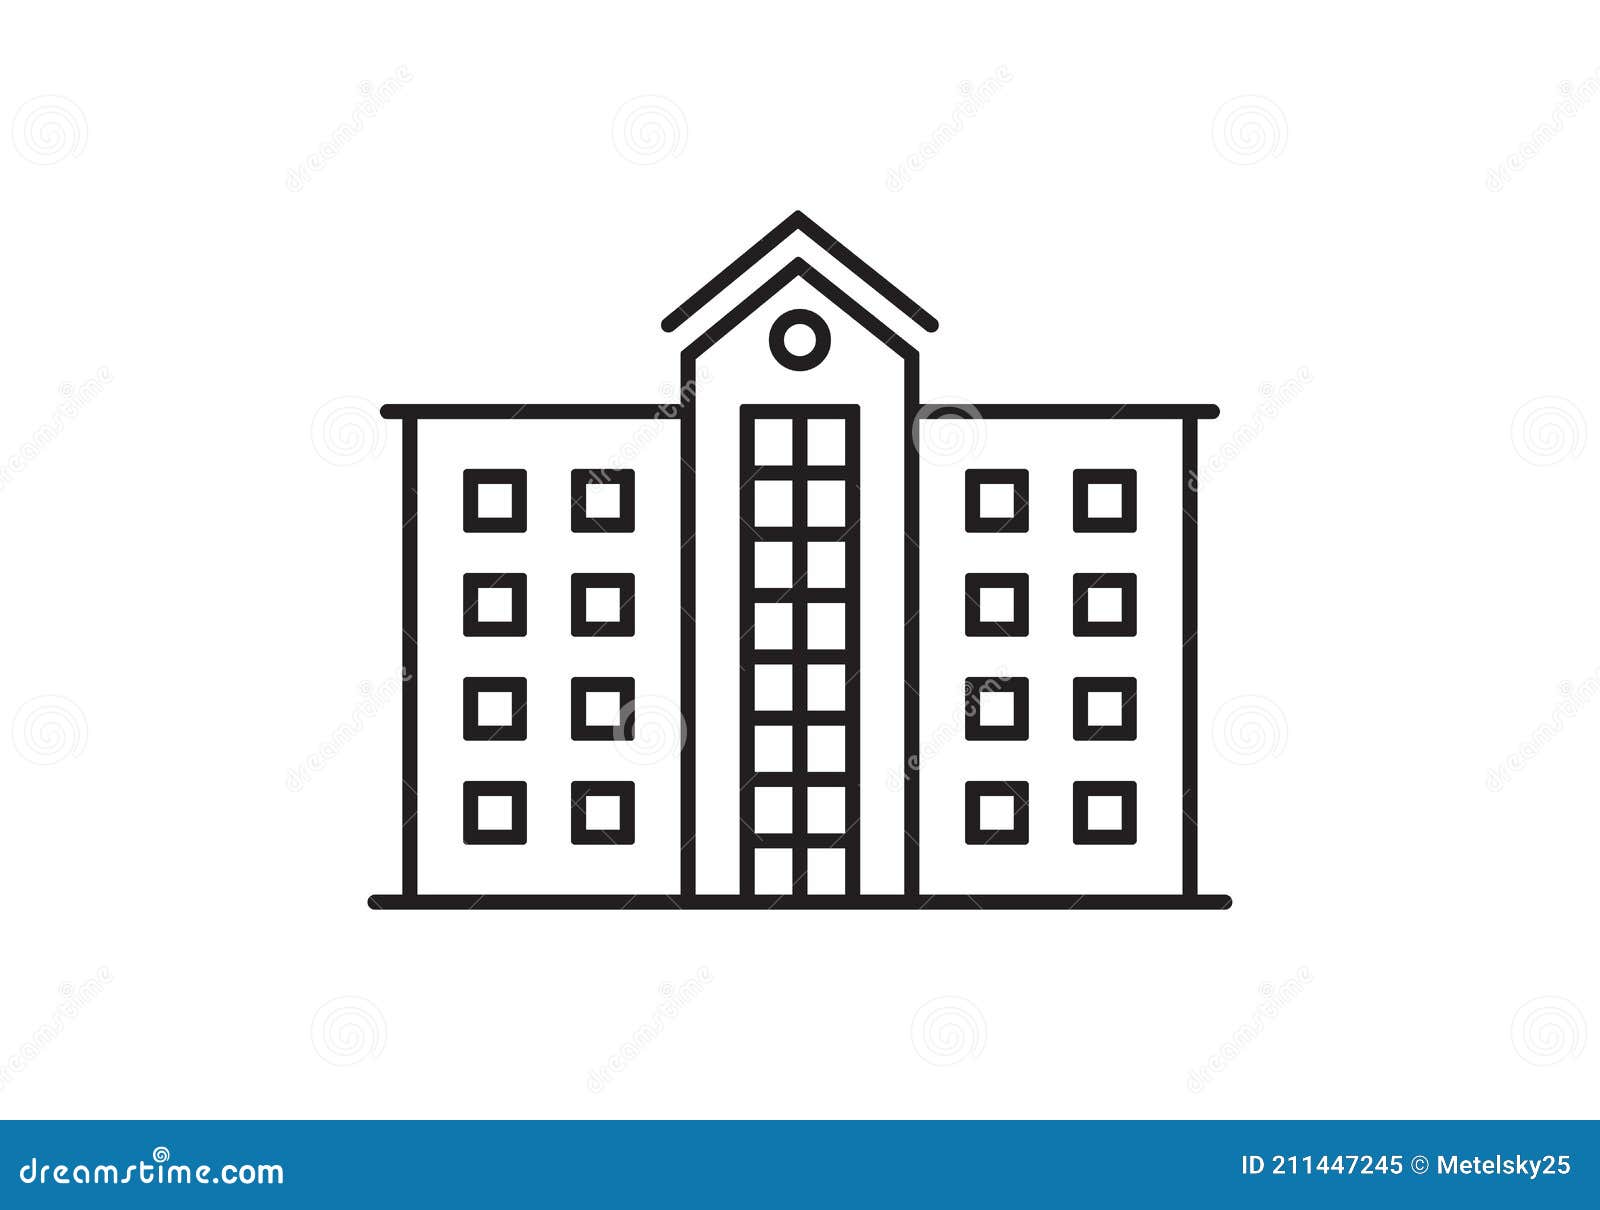 office building outline icon. hotel, government or hospital building exterior.  